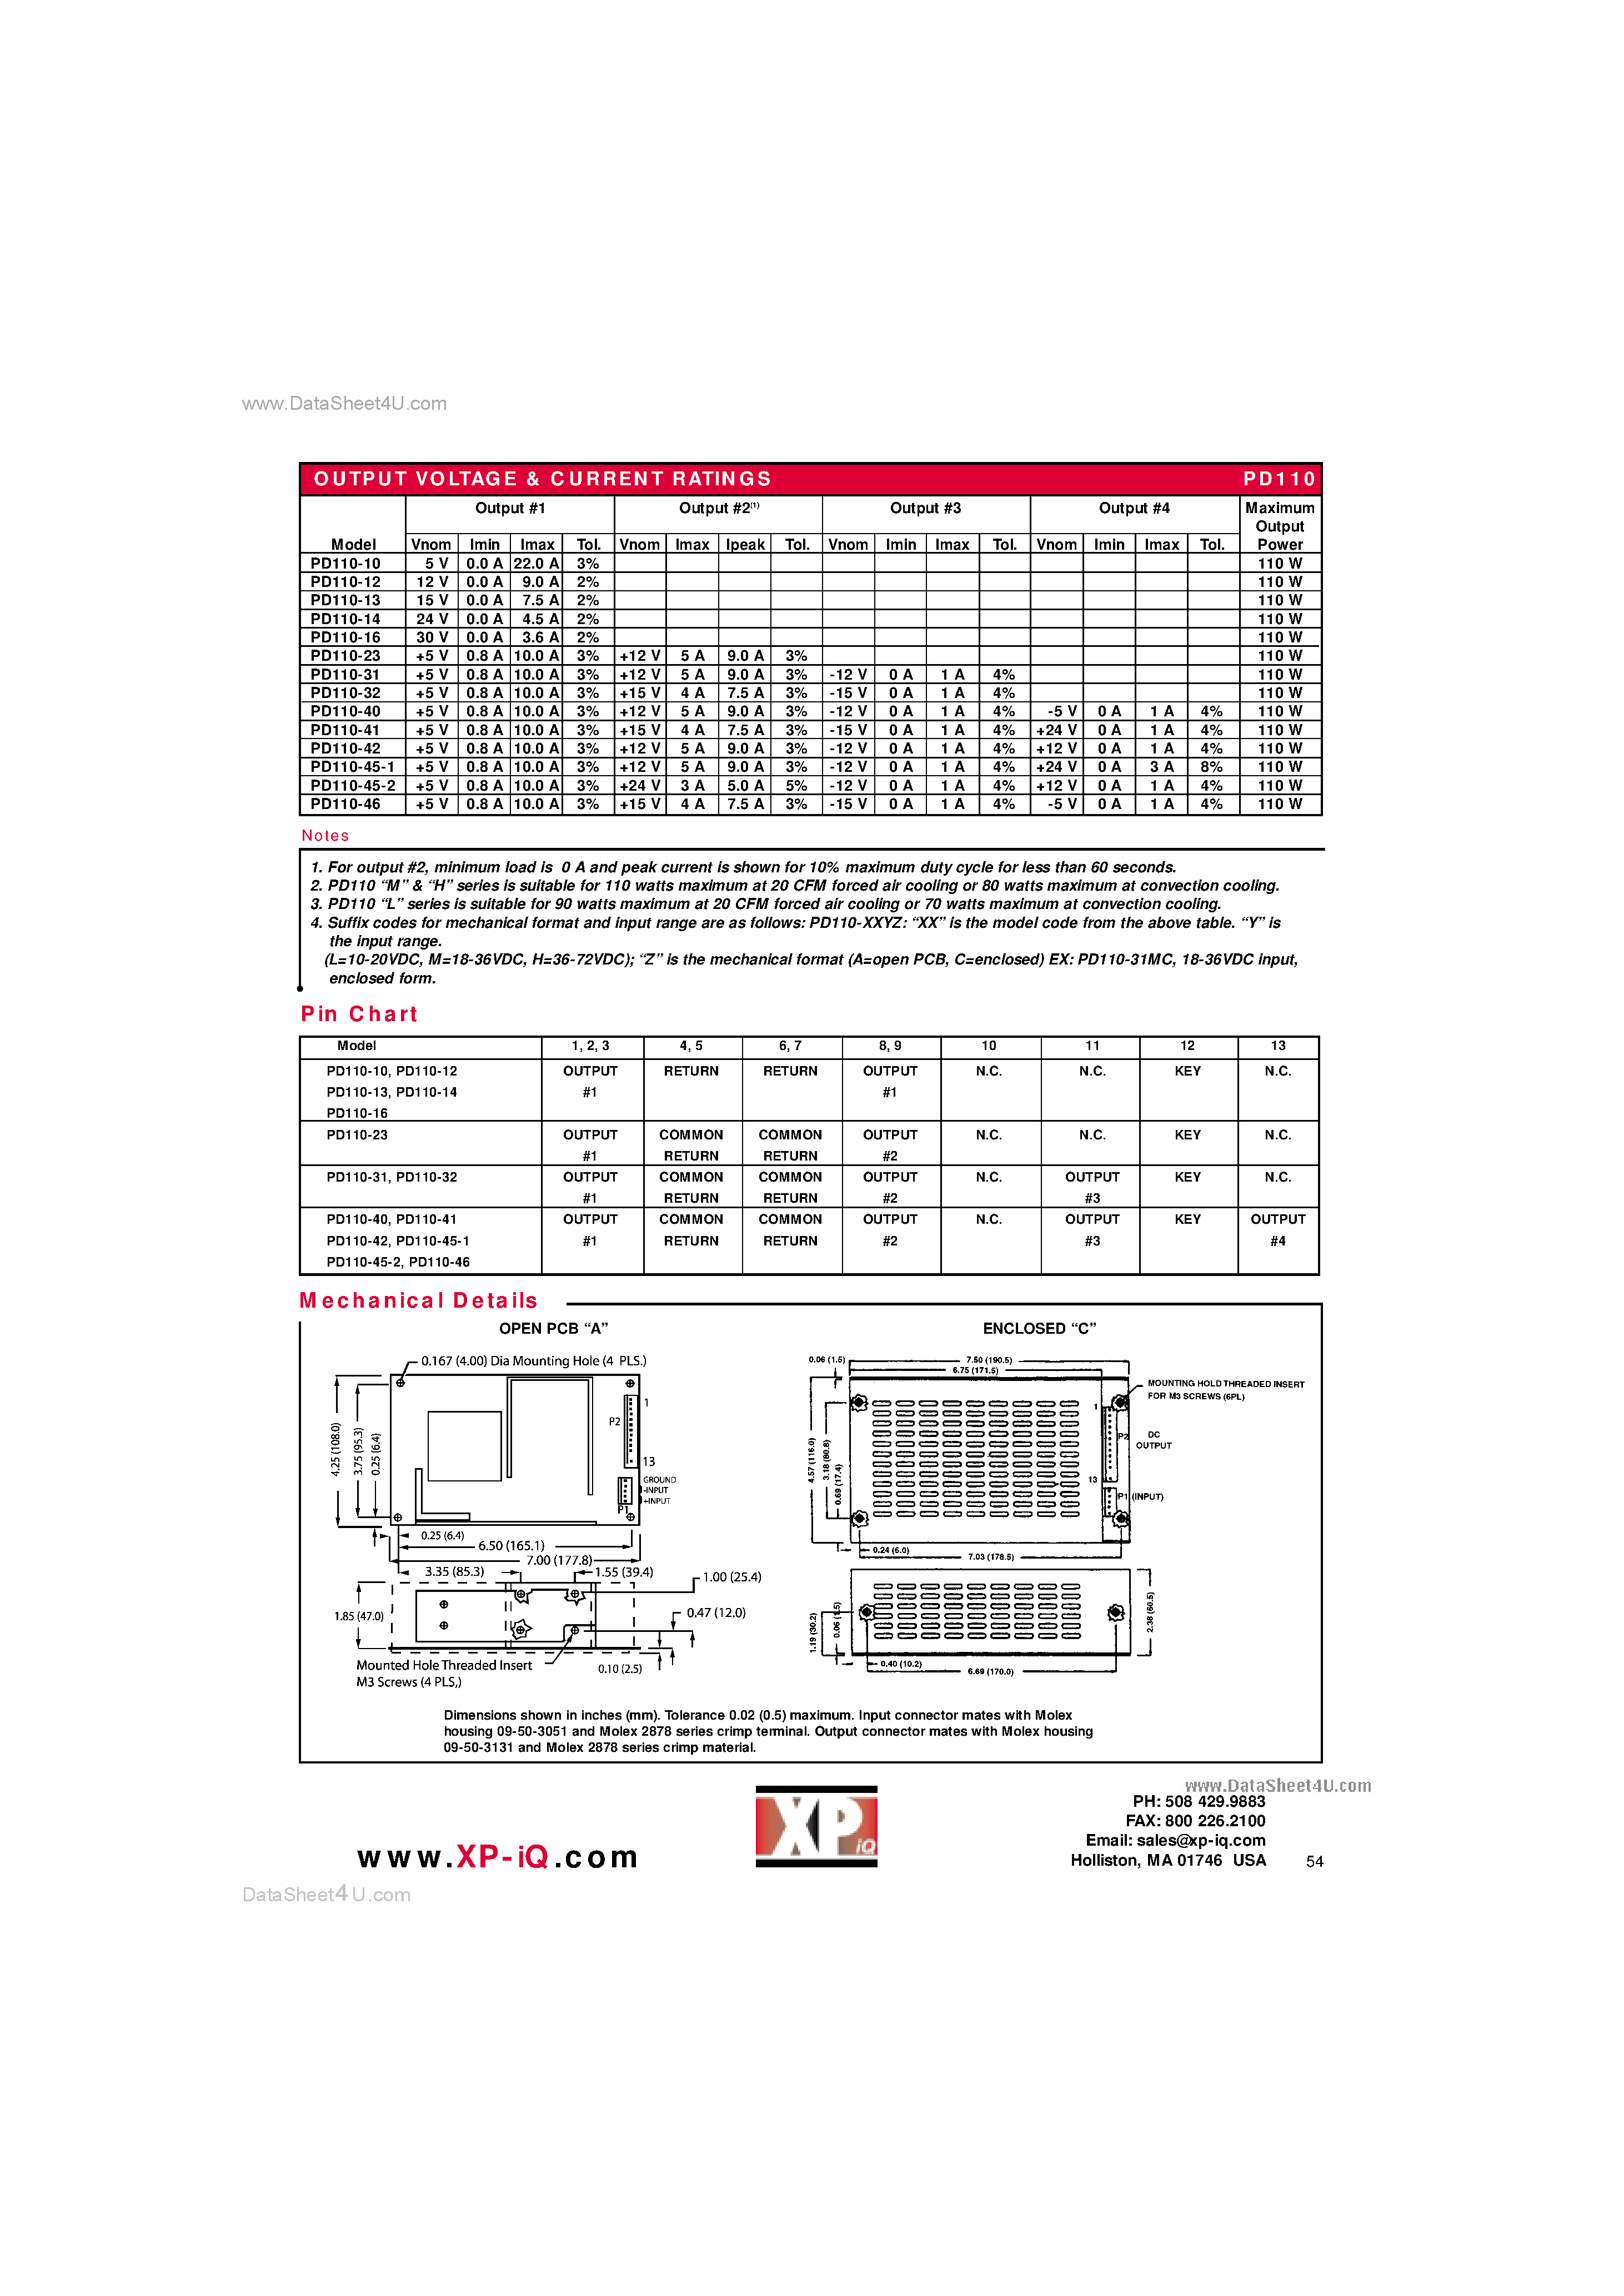 Datasheet PD110 - DC/DC Converters page 2